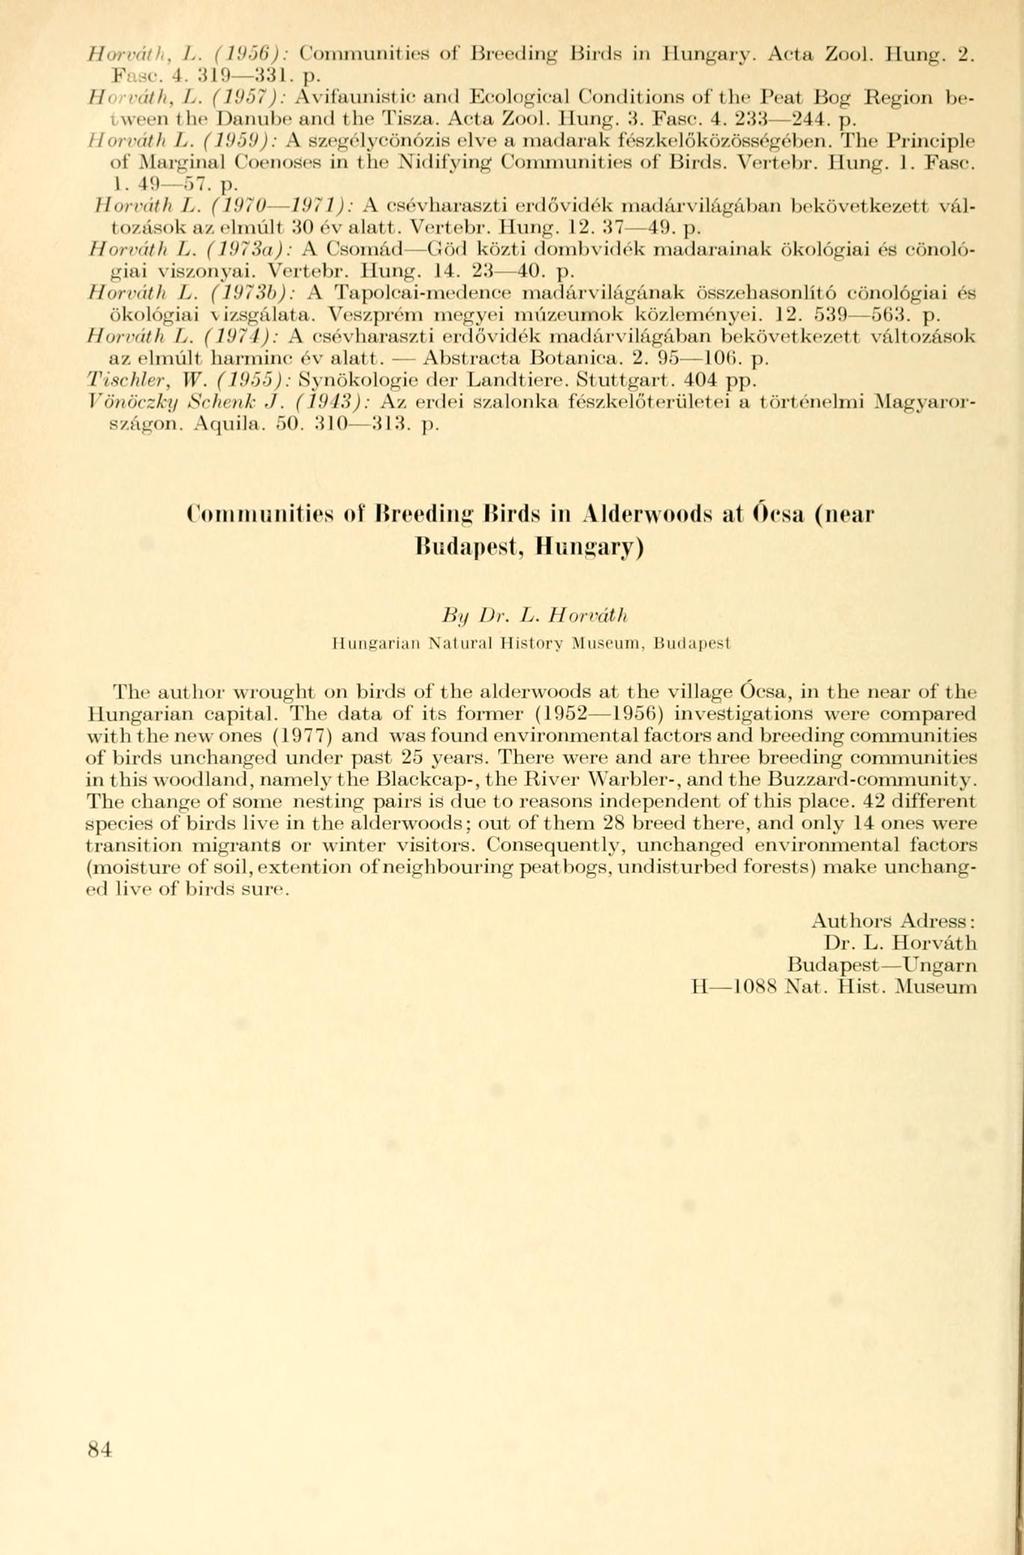 Horváth, L. (1956): Communities of Breeding Birds in Hungary. Acta Zool. Hung. 2. Fasc. 4. 319 331. p. //- rulh. /.. ( l'.i.')7): Avilaunistic and Keological Condit ions of the Beat Bog Region beiveen the Danube and the Tis/.